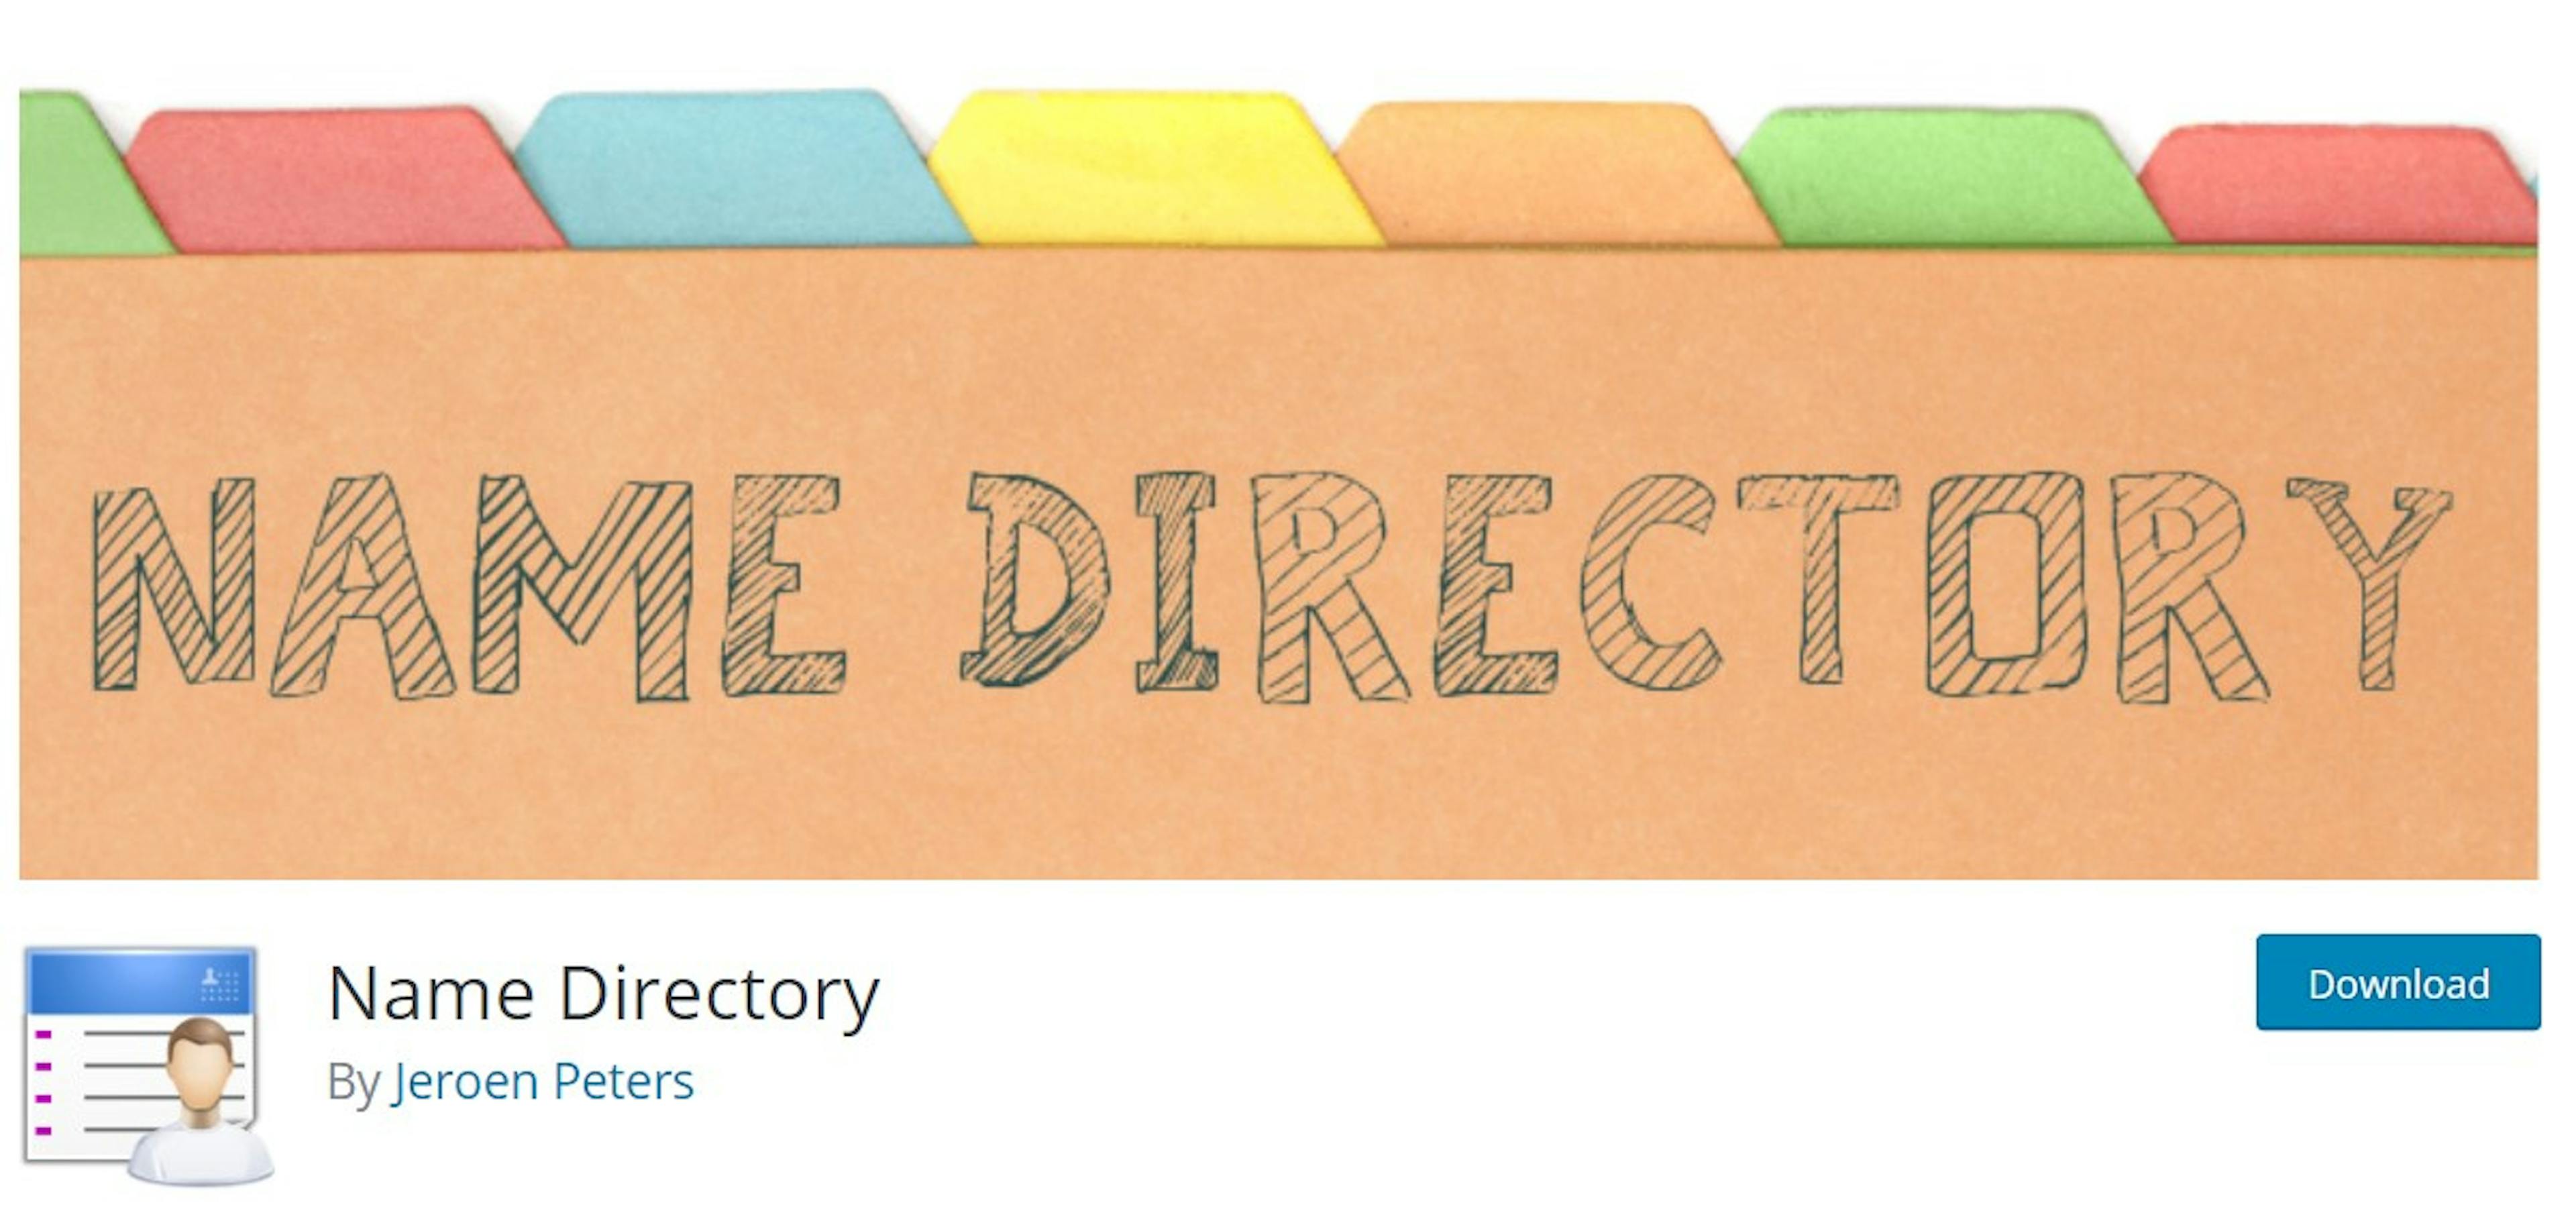 Name Directory